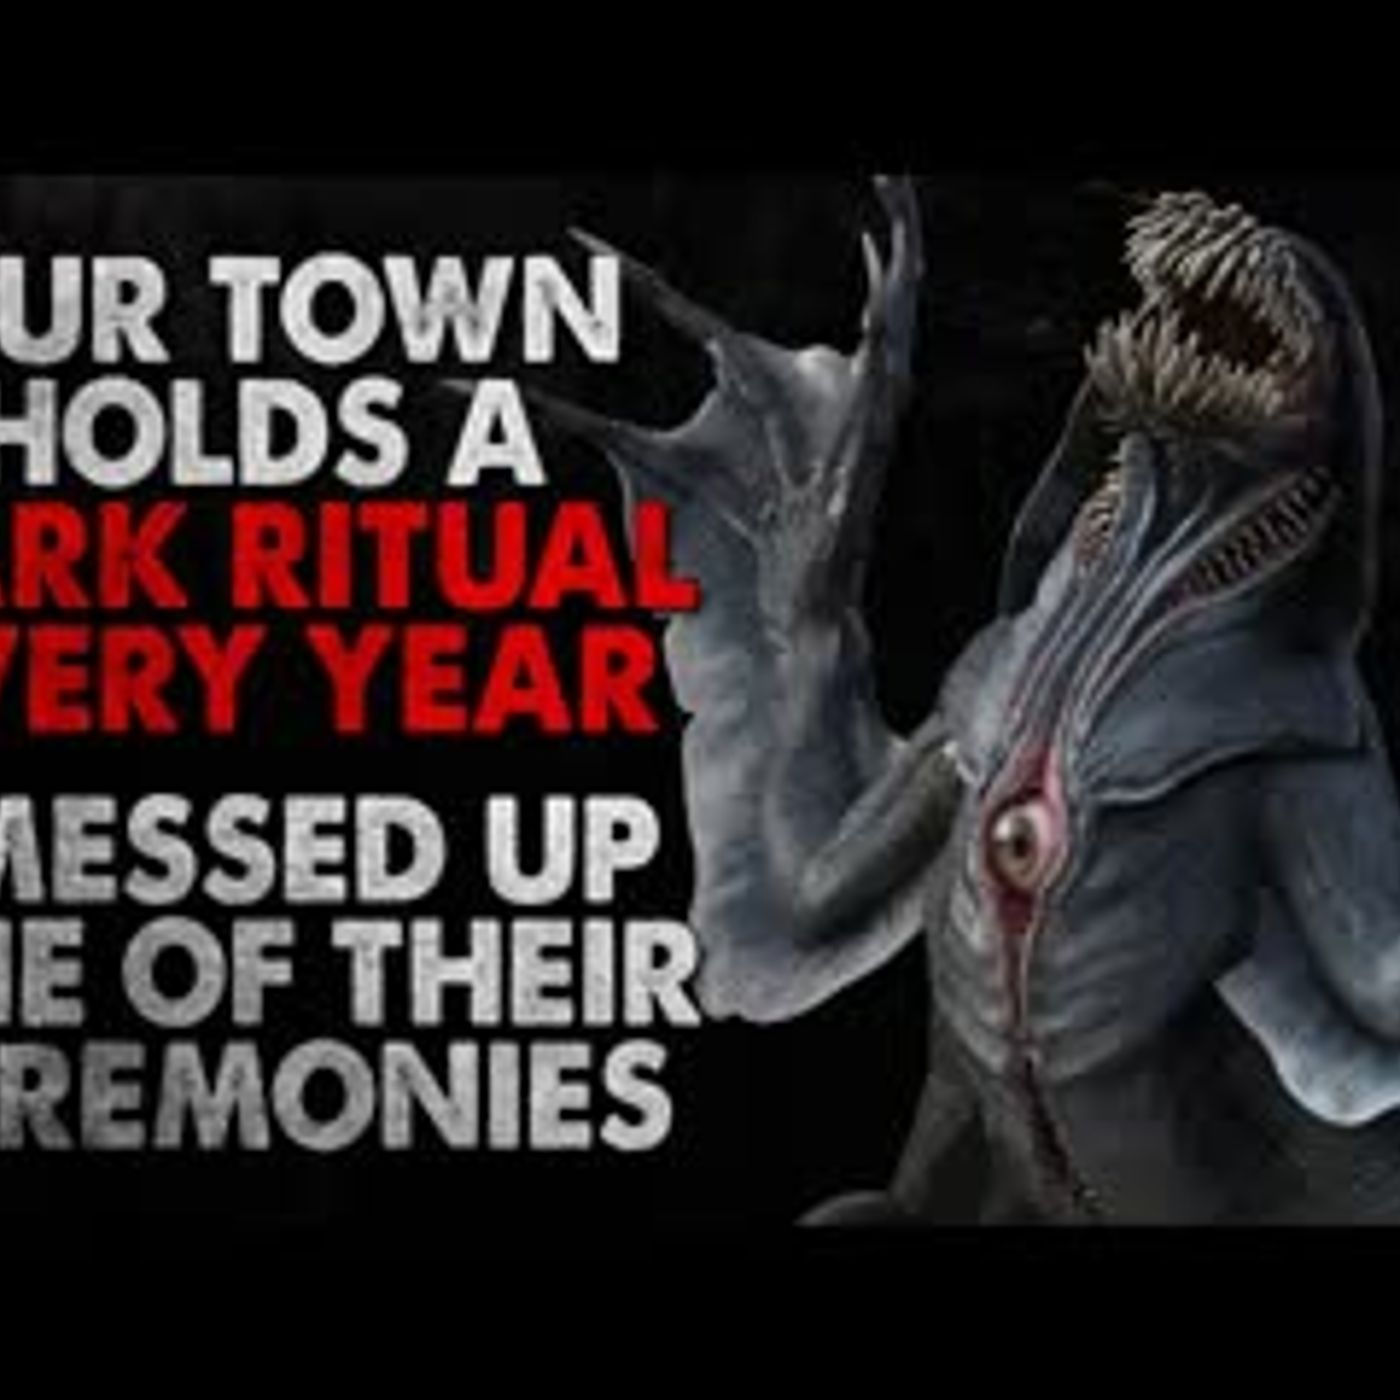 "Our town holds a dark ritual every year. I messed up one of their ceremonies" Creepypasta